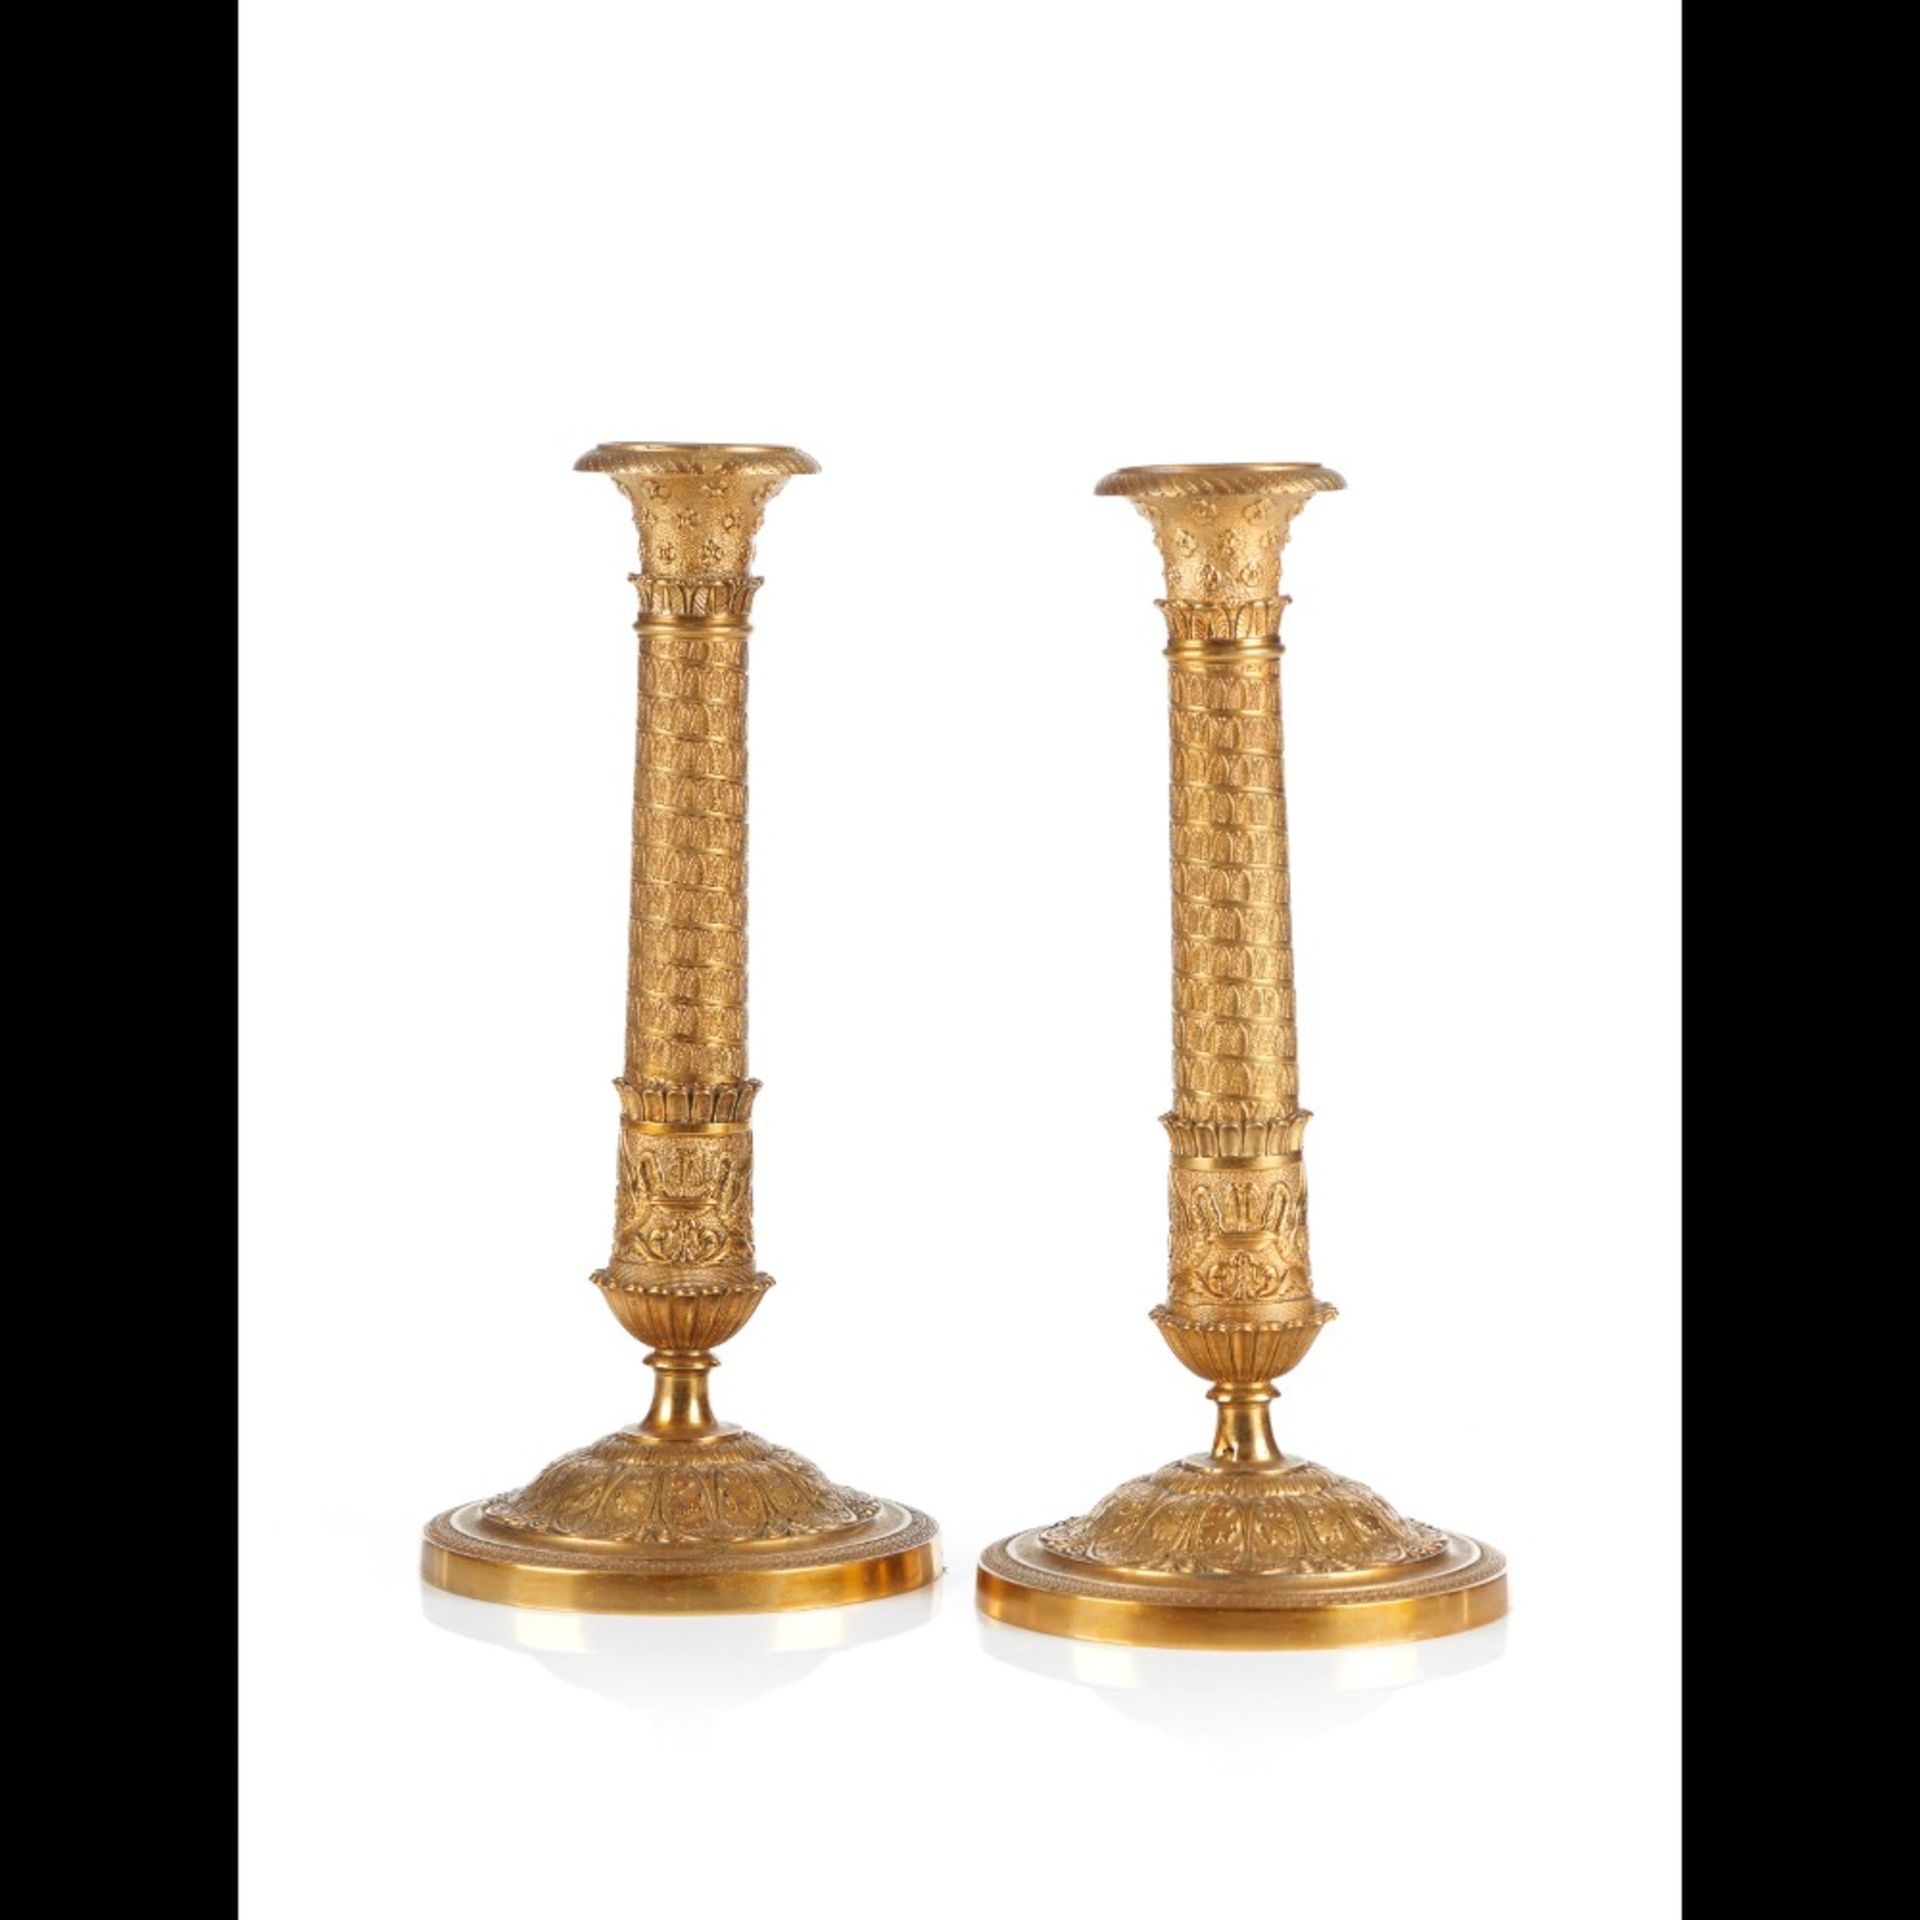  A pair of Empire style candlesticks